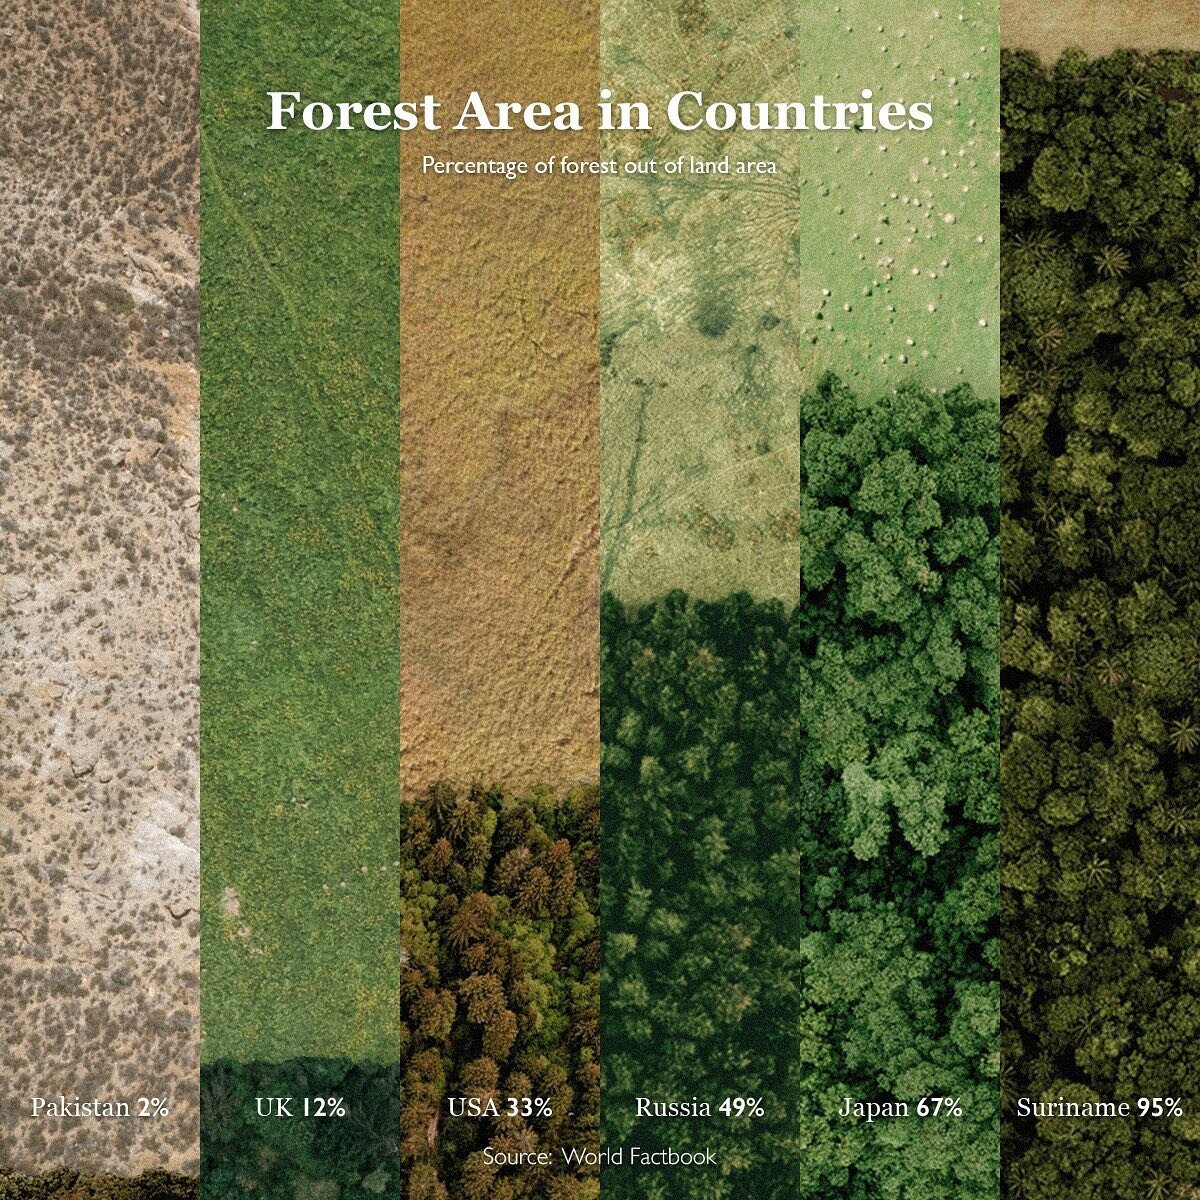 Forests cover about 30% of the land area on Earth - Suriname is one of the most forested countries with around 95% of the land covered with forests - about 15 million hectares. Pakistan on the other hand is very poor in forests due to low precipitati